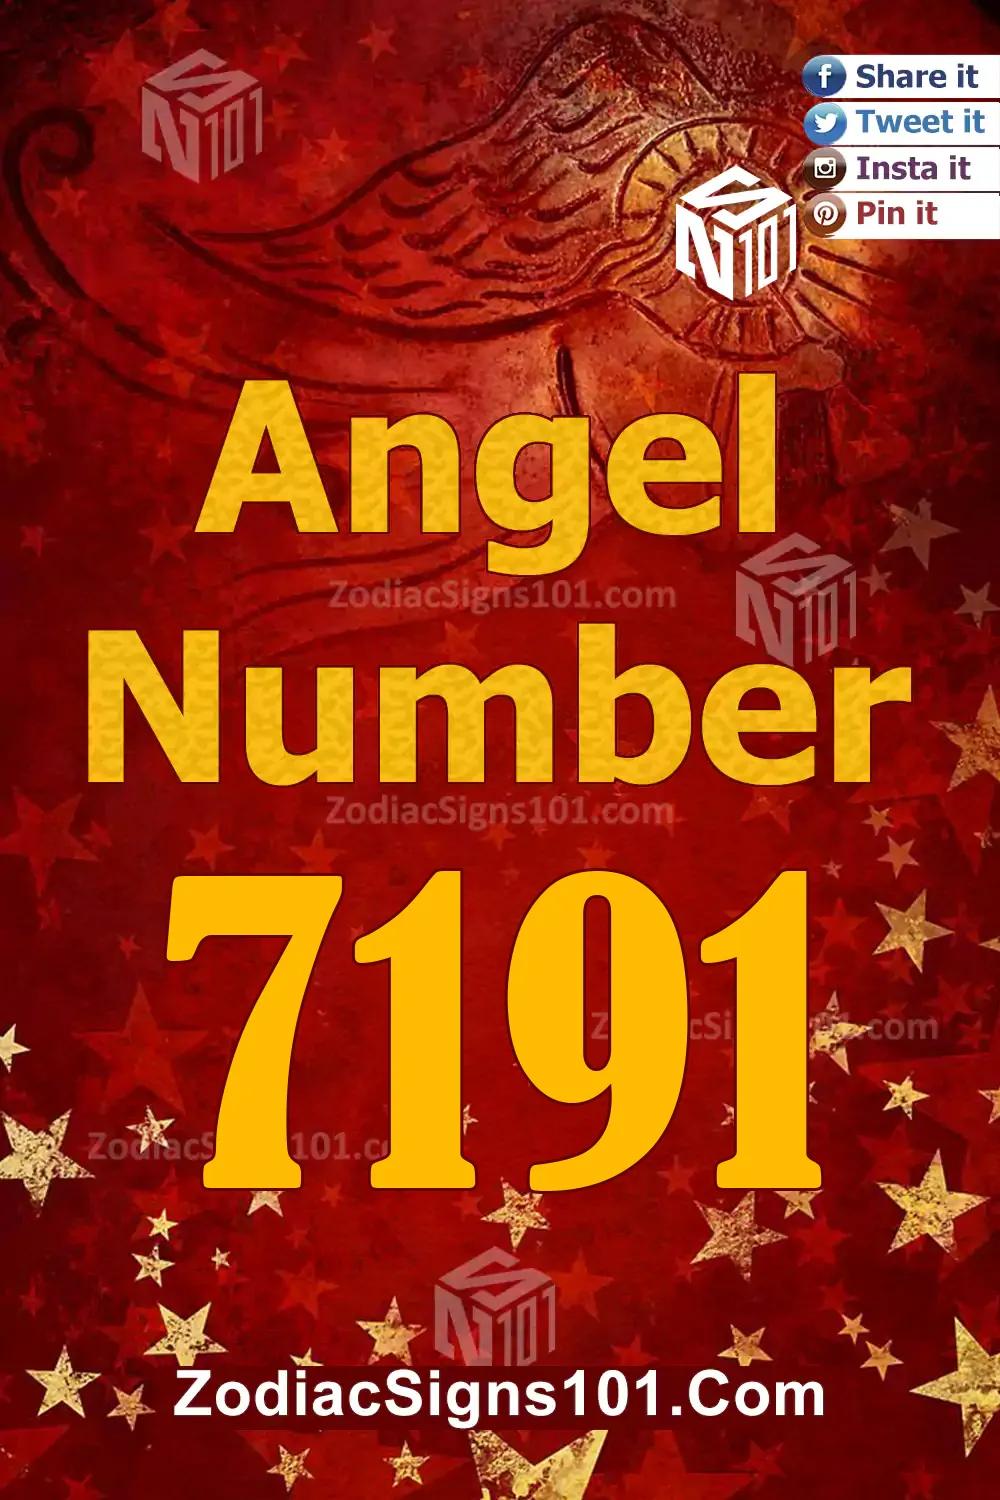 7191 Angel Number Meaning